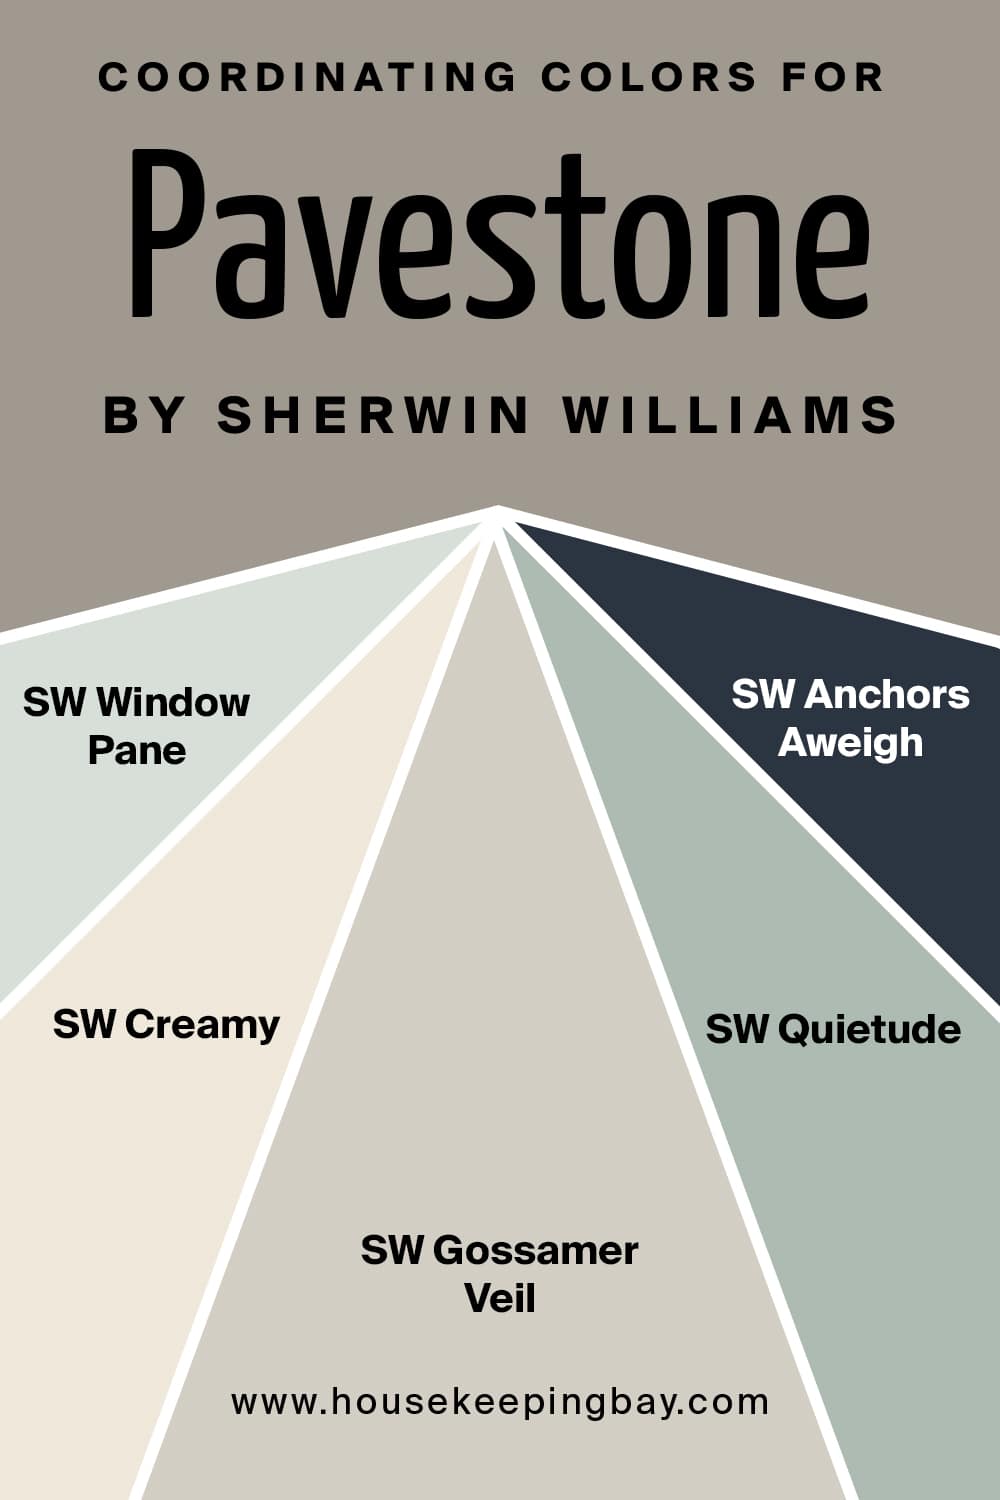 Coordinating Colors For SW Pavestone